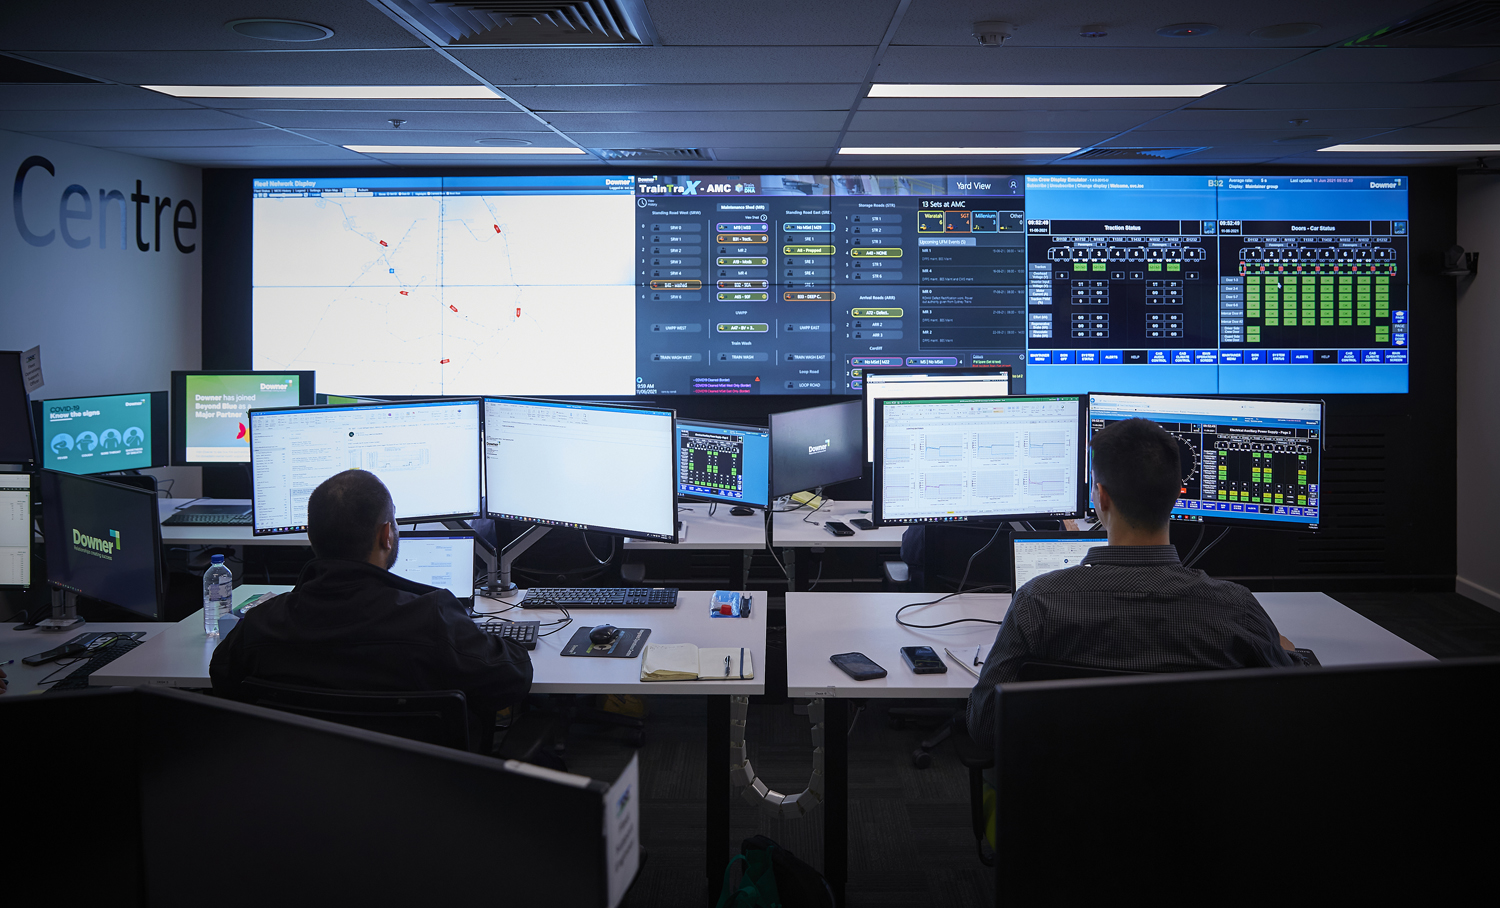 Rail network controllers in front of computer screens